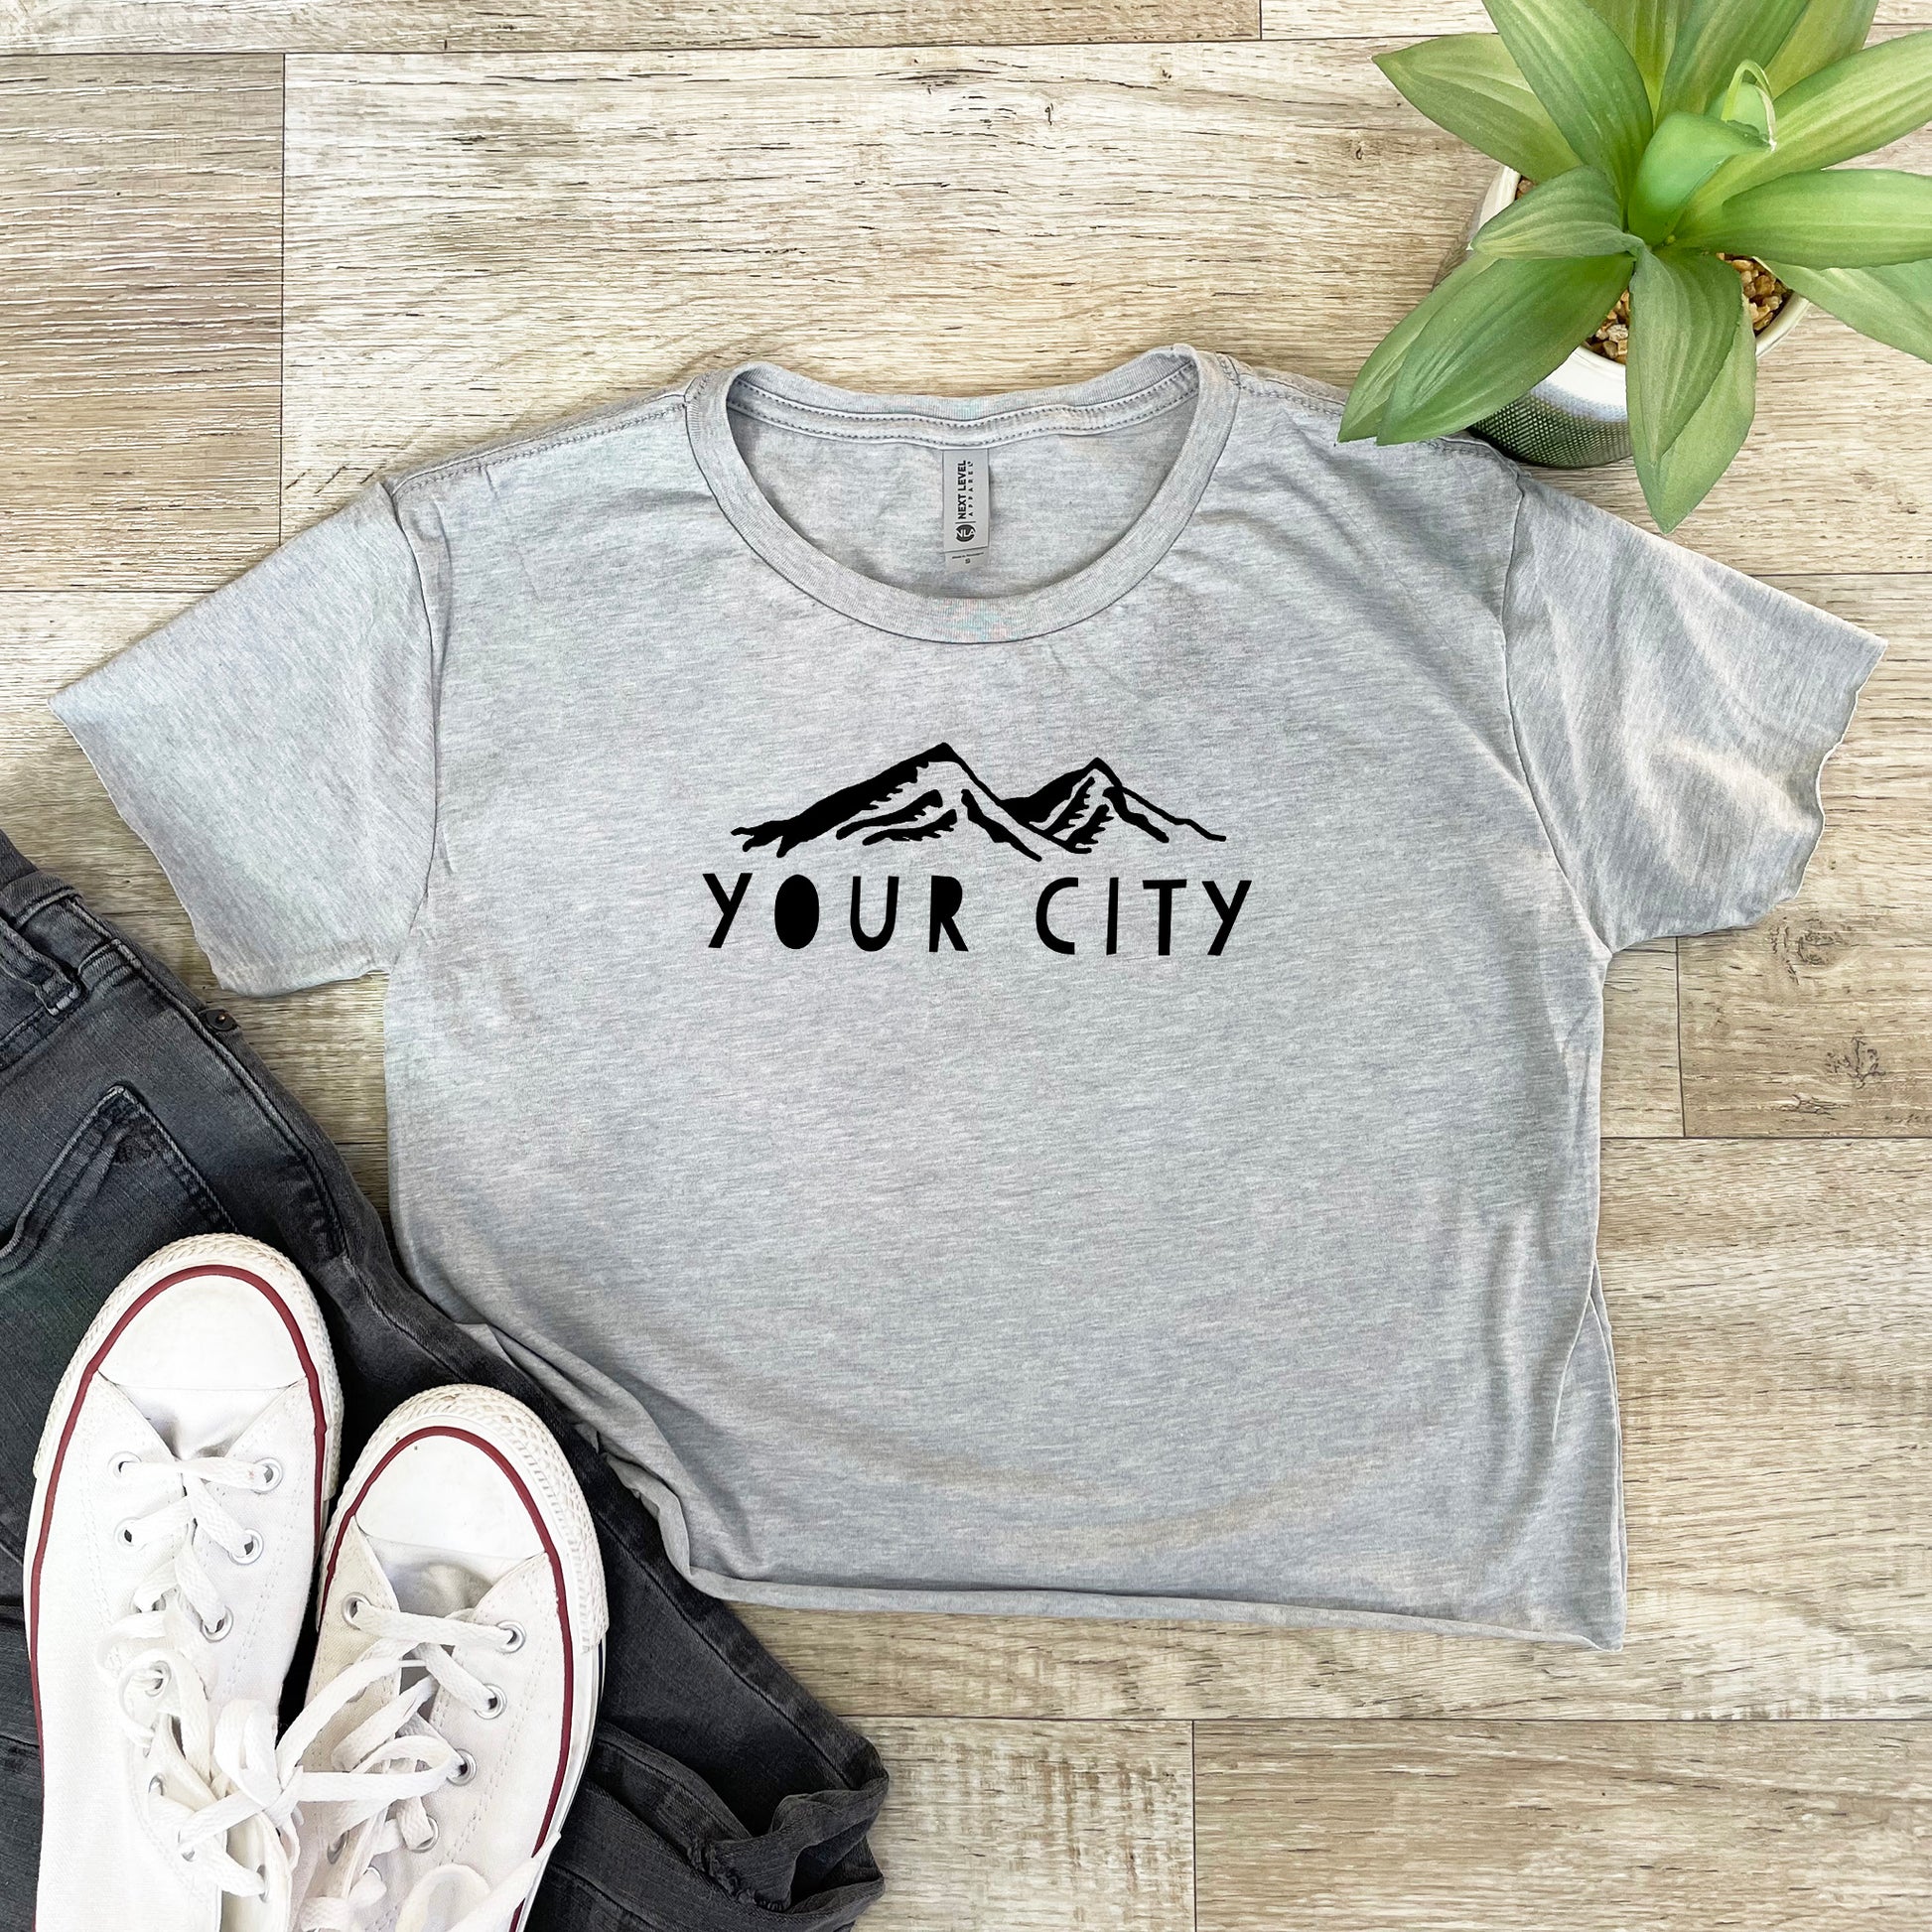 a t - shirt with the words your city on it next to a pair of